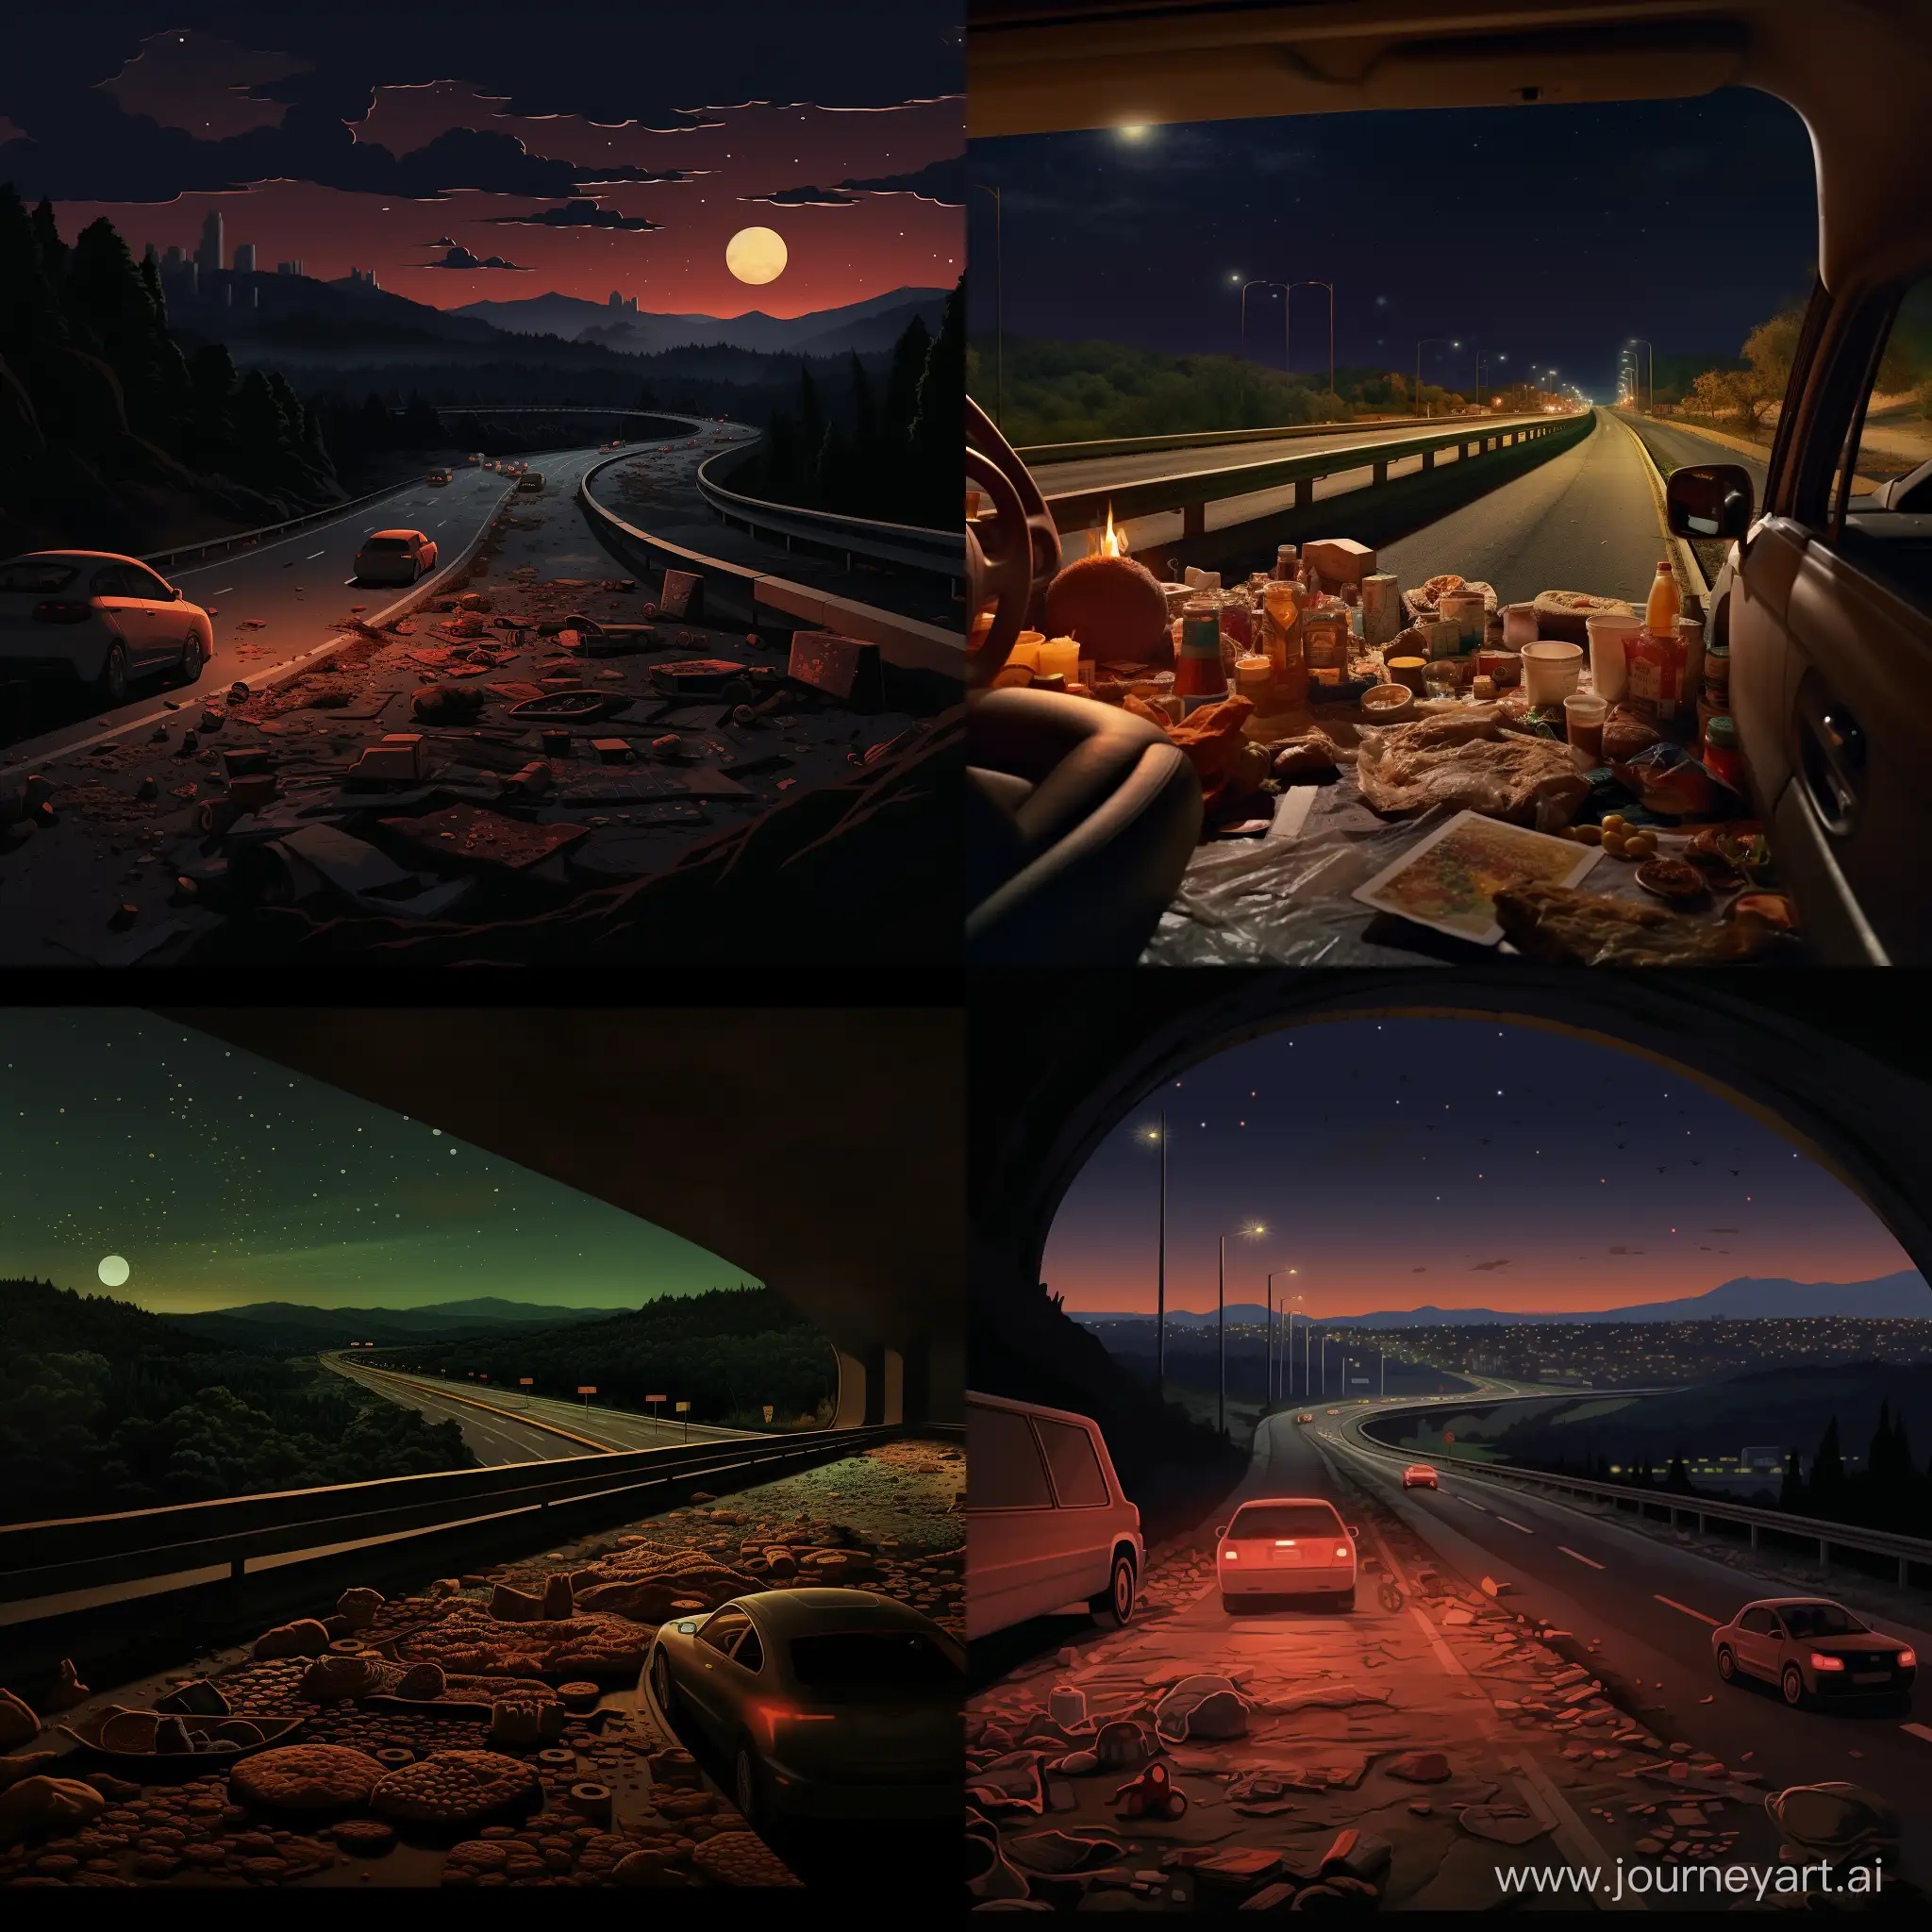 Mysterious-Nighttime-Freeway-Drive-with-Barbecue-Meat-Mound